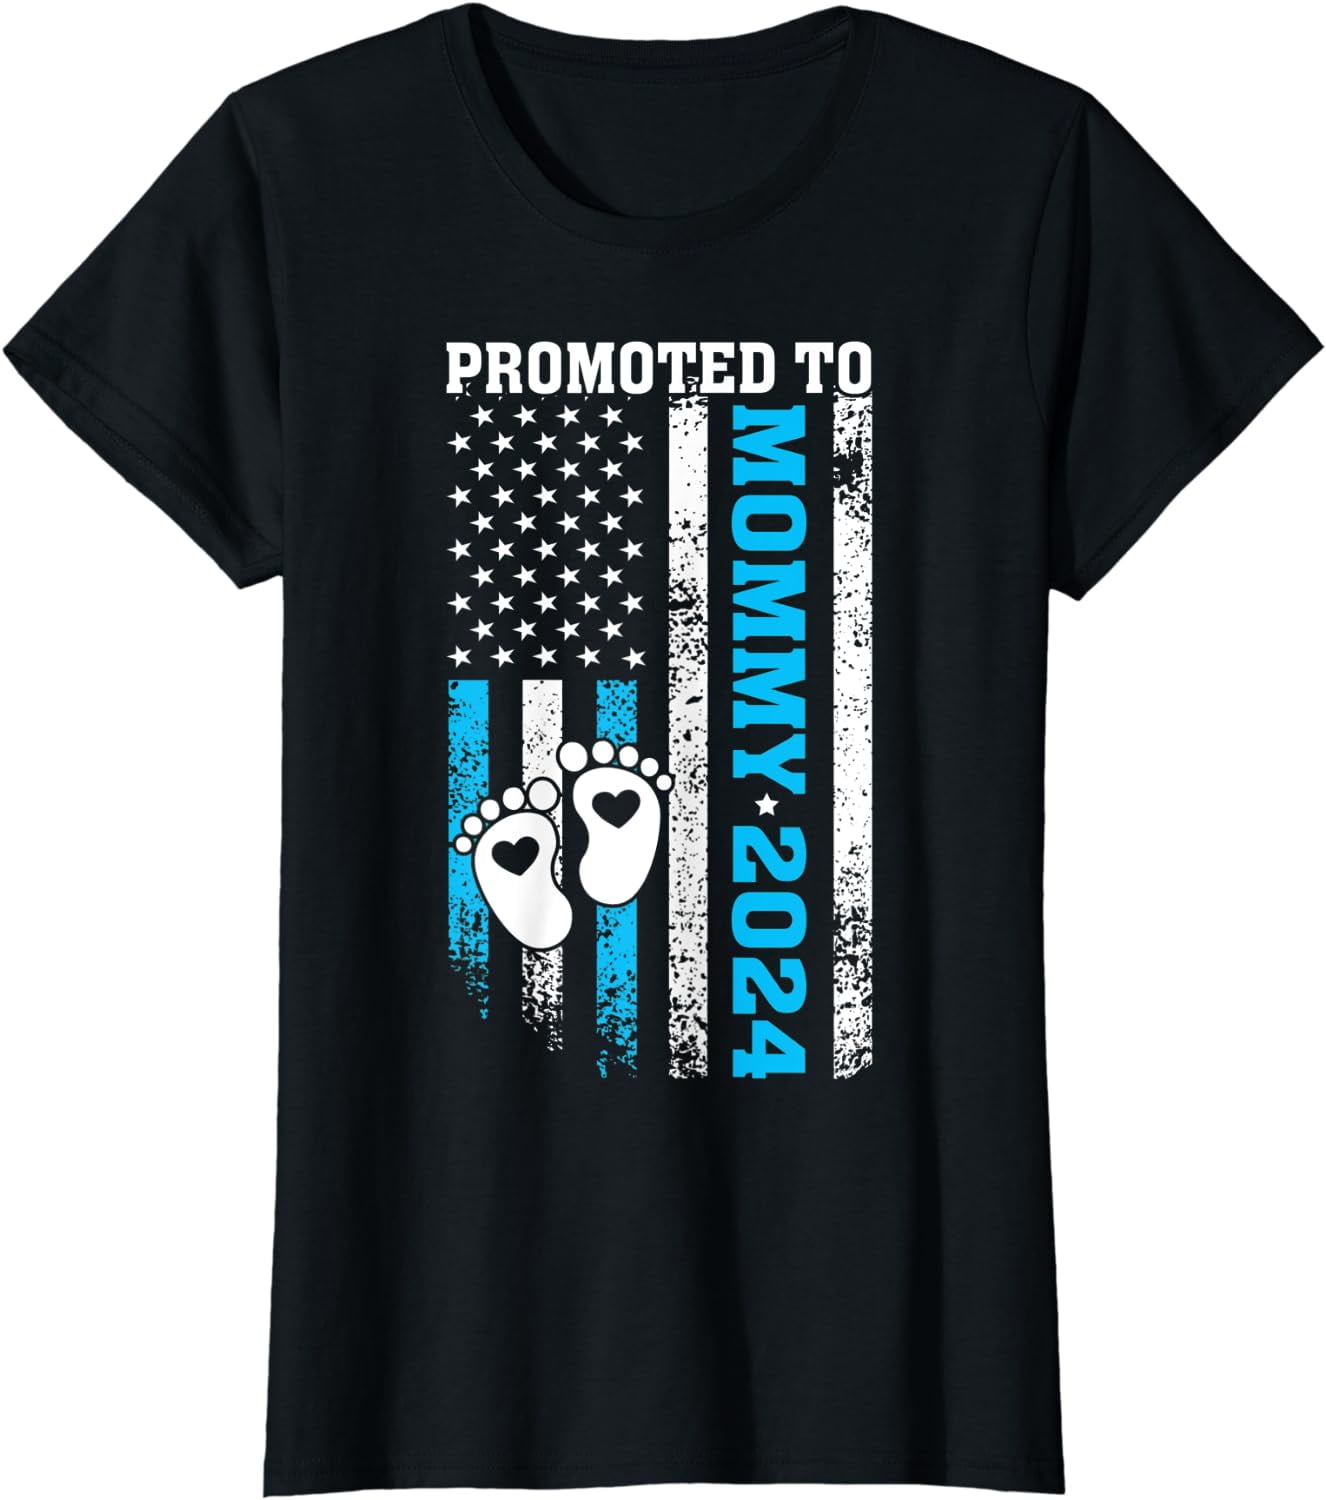 Womens Promoted To Mommy 2024 Gift Soon To Be Mommy 2024 New Mom T Shirt Cebda7b0 4900 4558 A099 05c366a691cf.a32c7fad3094f1ecc74c0118ccbdbf0b 